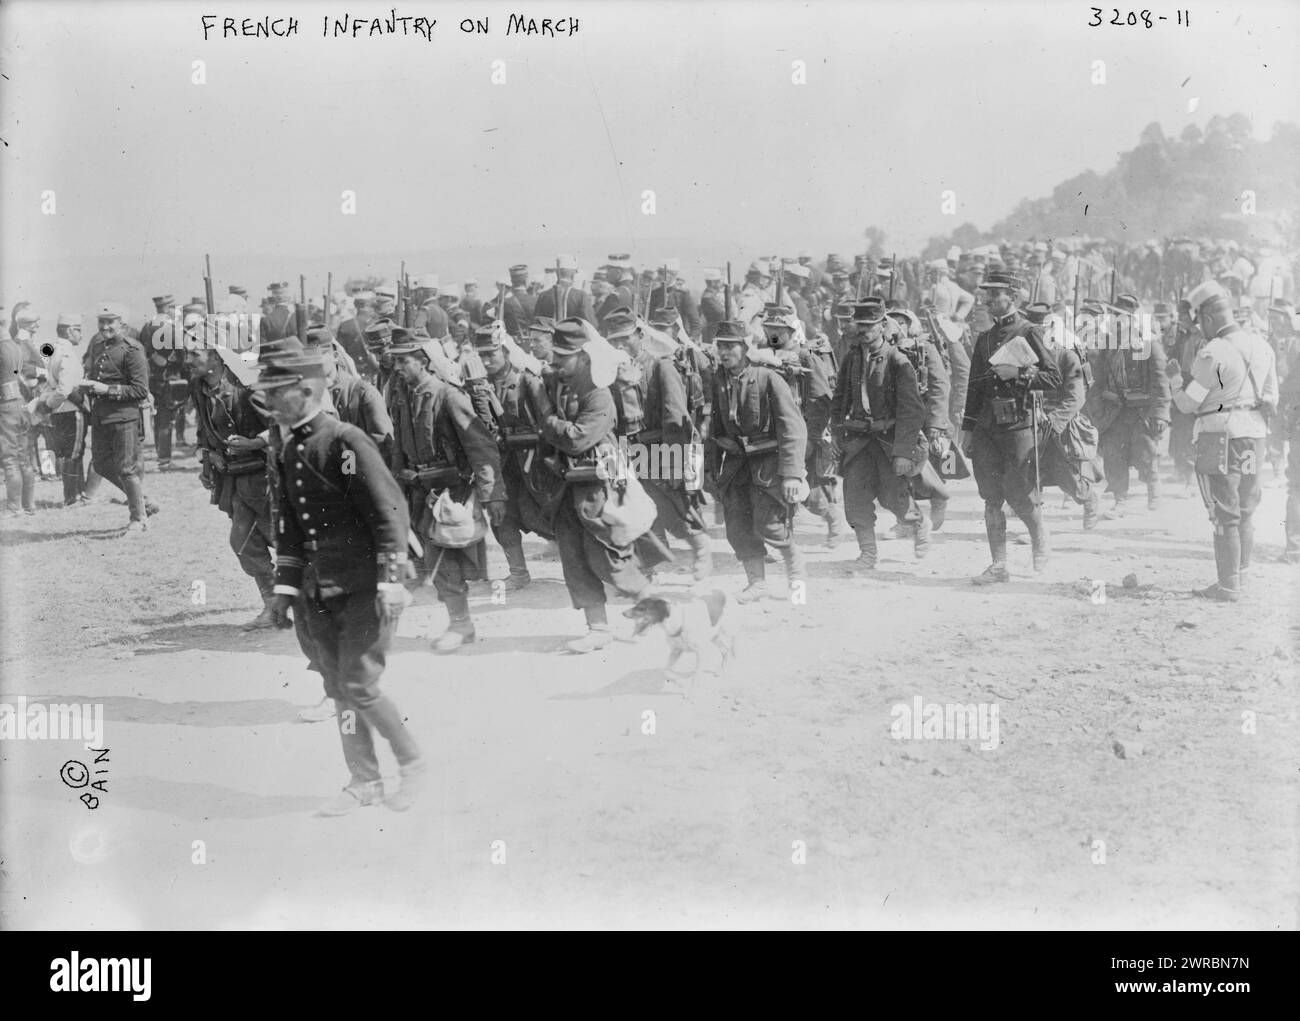 French Infantry on march, Photograph shows French soldiers marching at the beginning of World War I., between ca. 1914 and ca. 1915, World War, 1914-1918, Glass negatives, 1 negative: glass Stock Photo